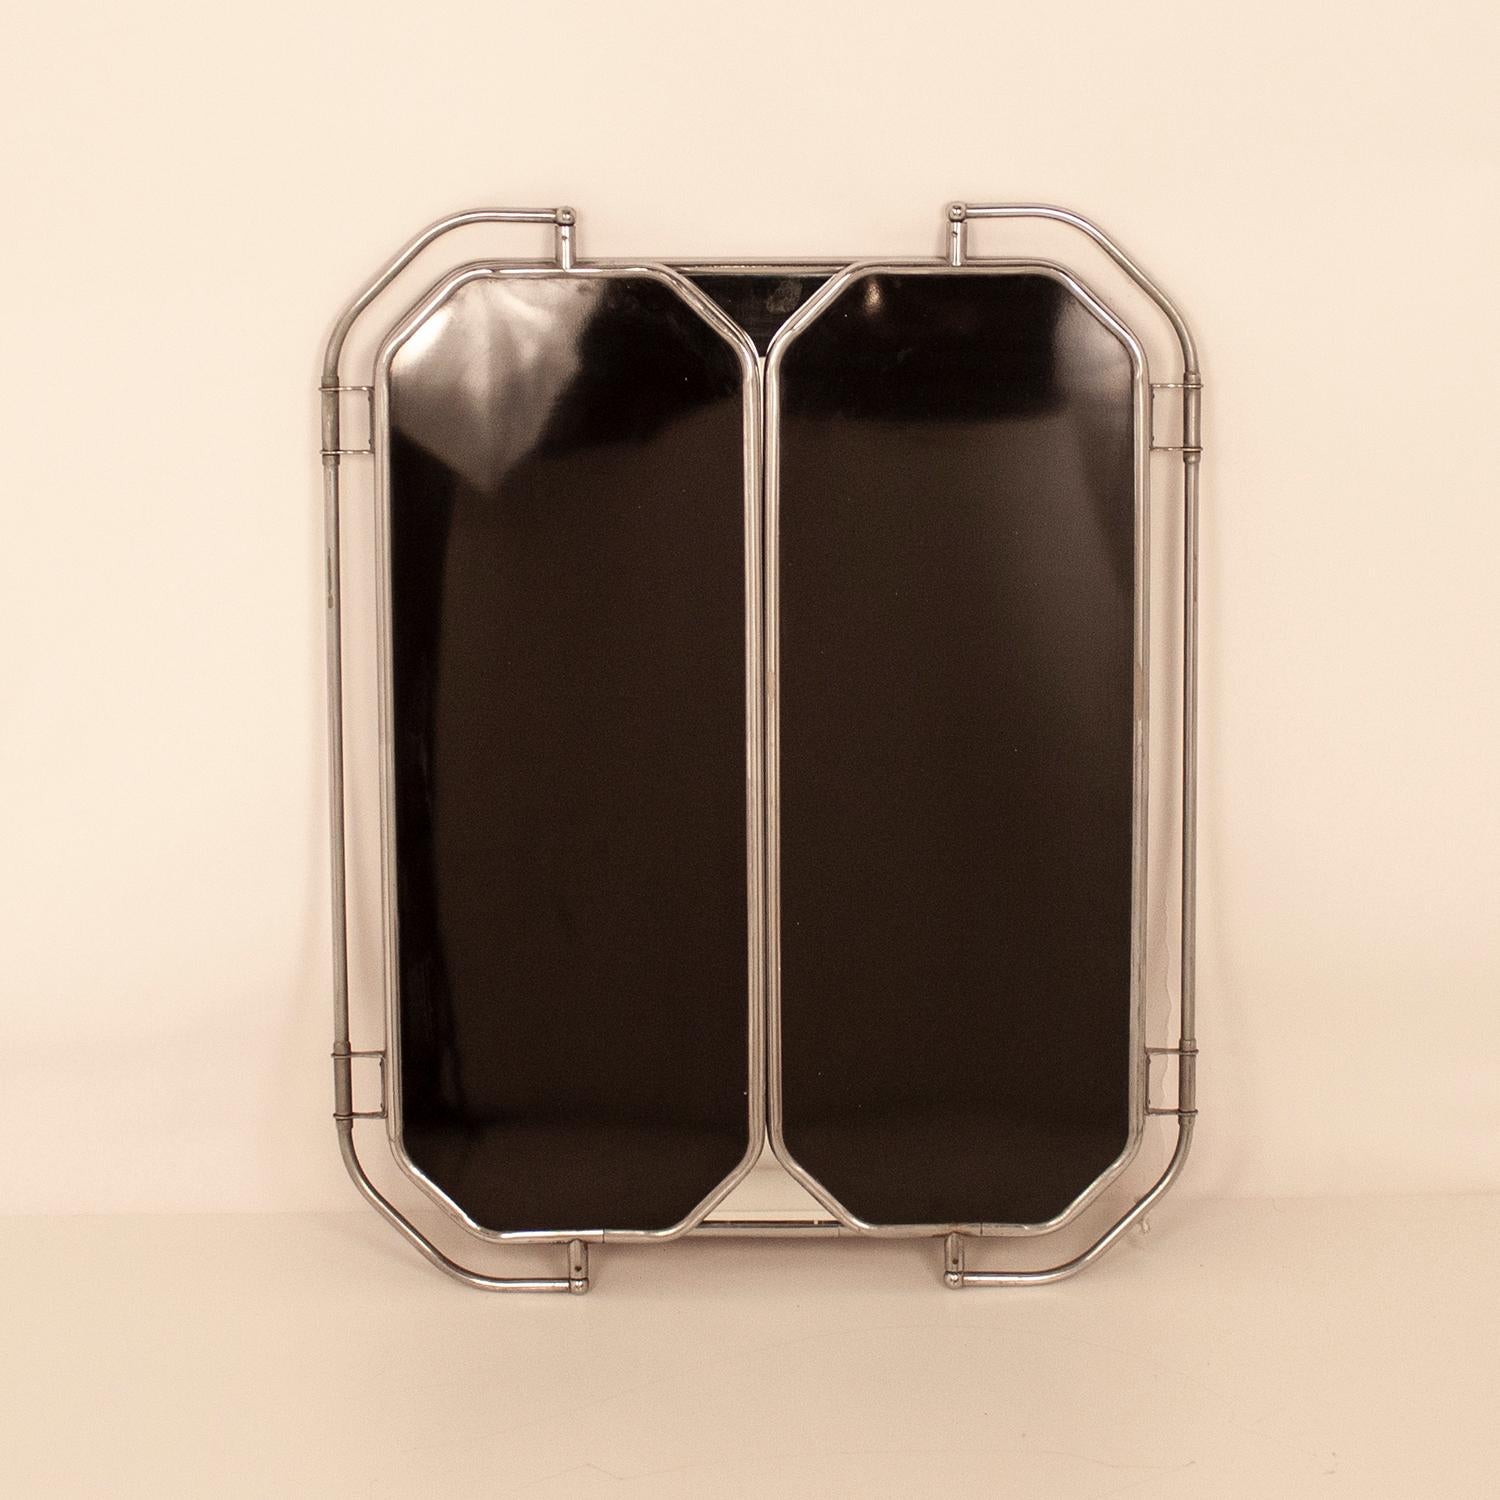 Large triptych mirror Bakelite and chrome. Spain, 1940s.
It consists of the central mirror and two oscillating side mirrors. On the side mirrors, the back is made of black Bakelite.
Measures fully open:
Width 45.66in (116cm.)
Depth 0.78in